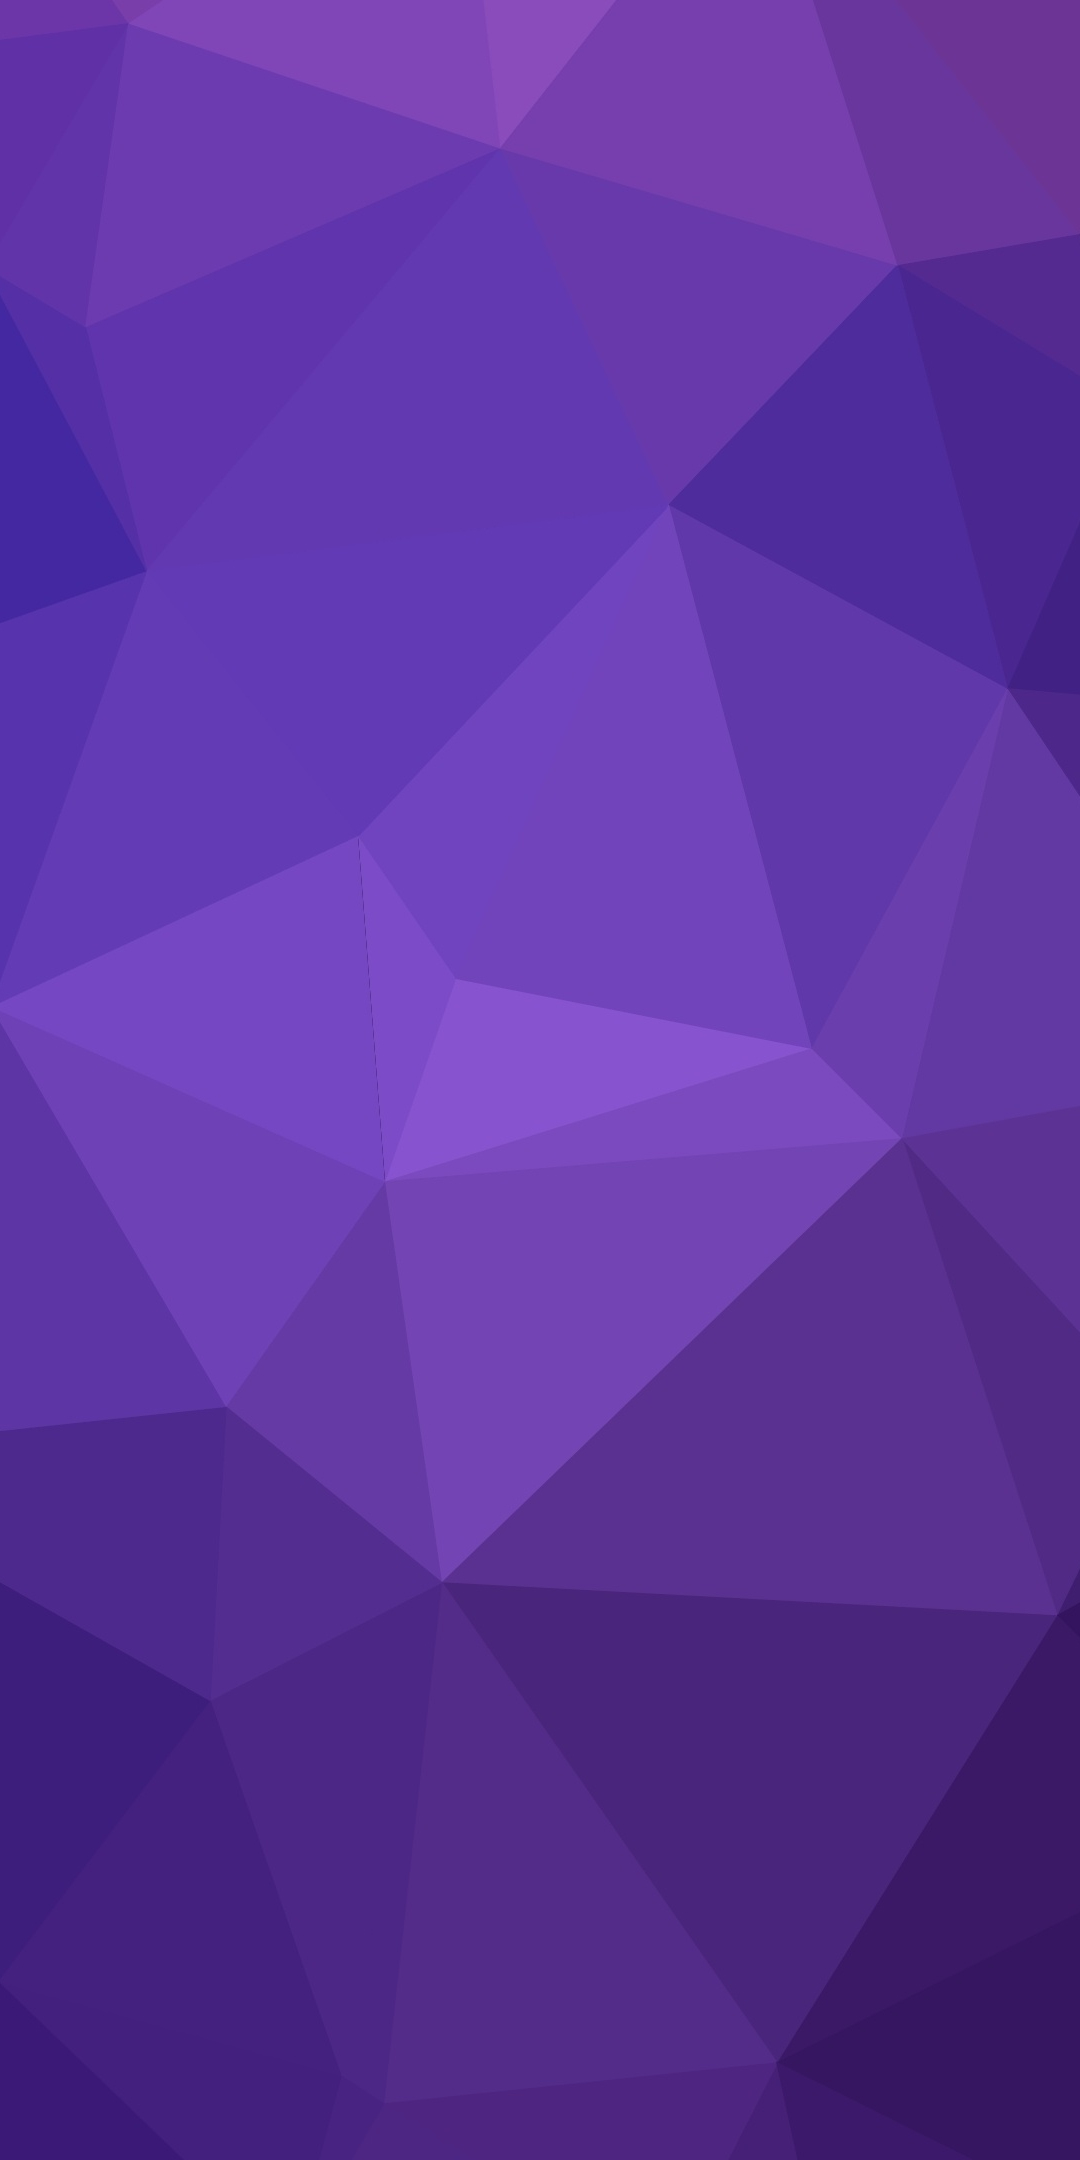 Geometry, triangles, gradient, purple, abstract, 1080x2160 wallpaper